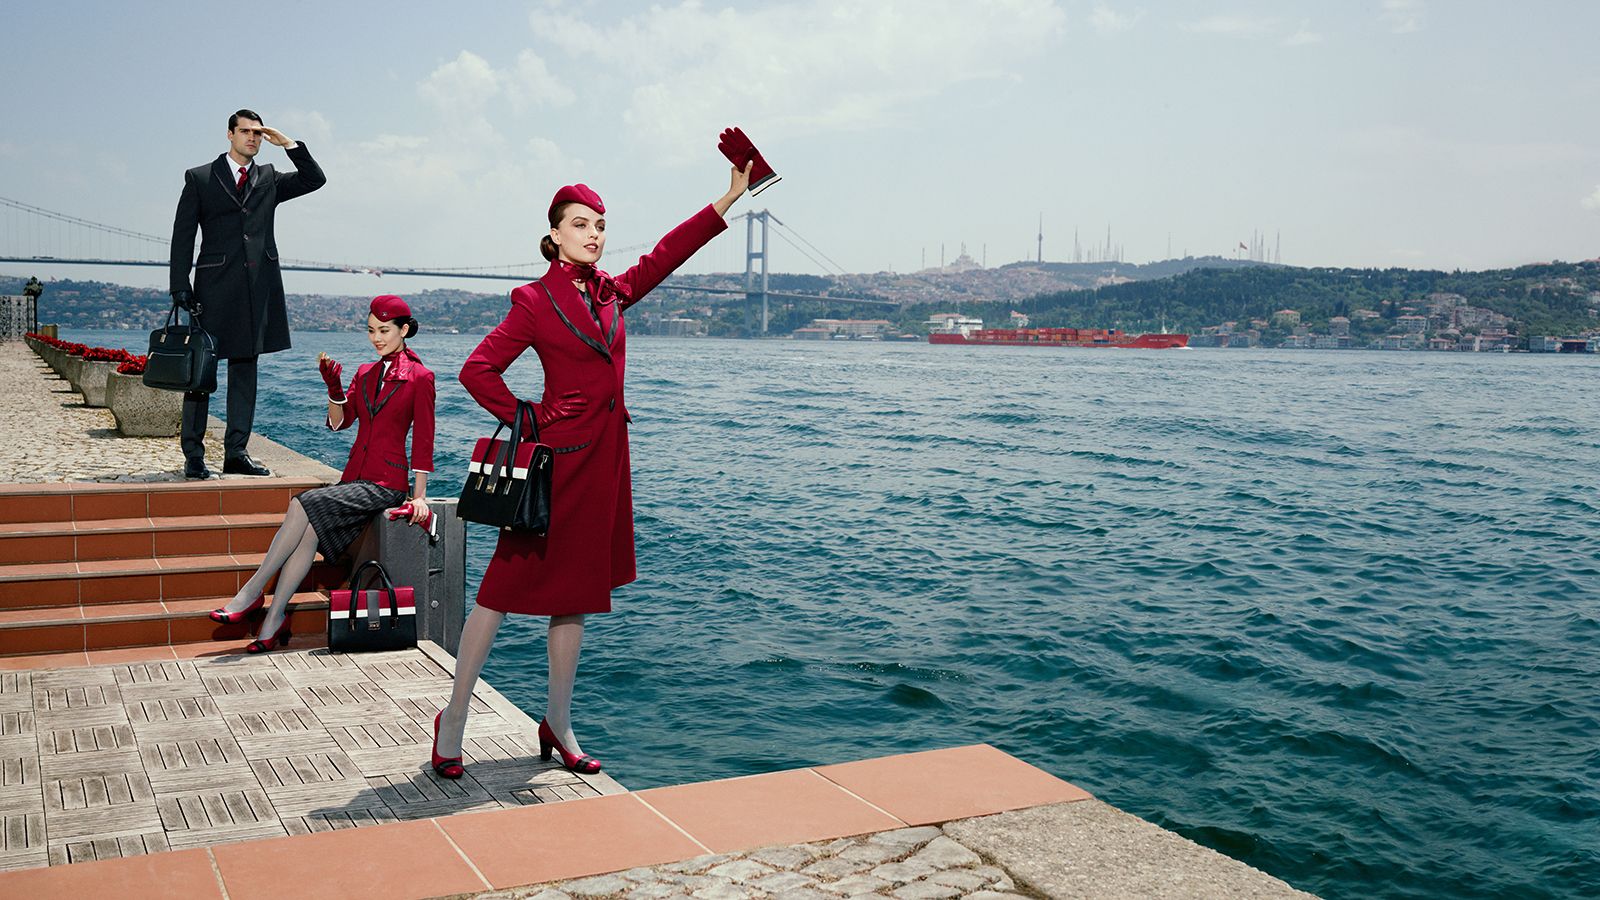 Turkish Airlines shows off new uniforms for cabin crew